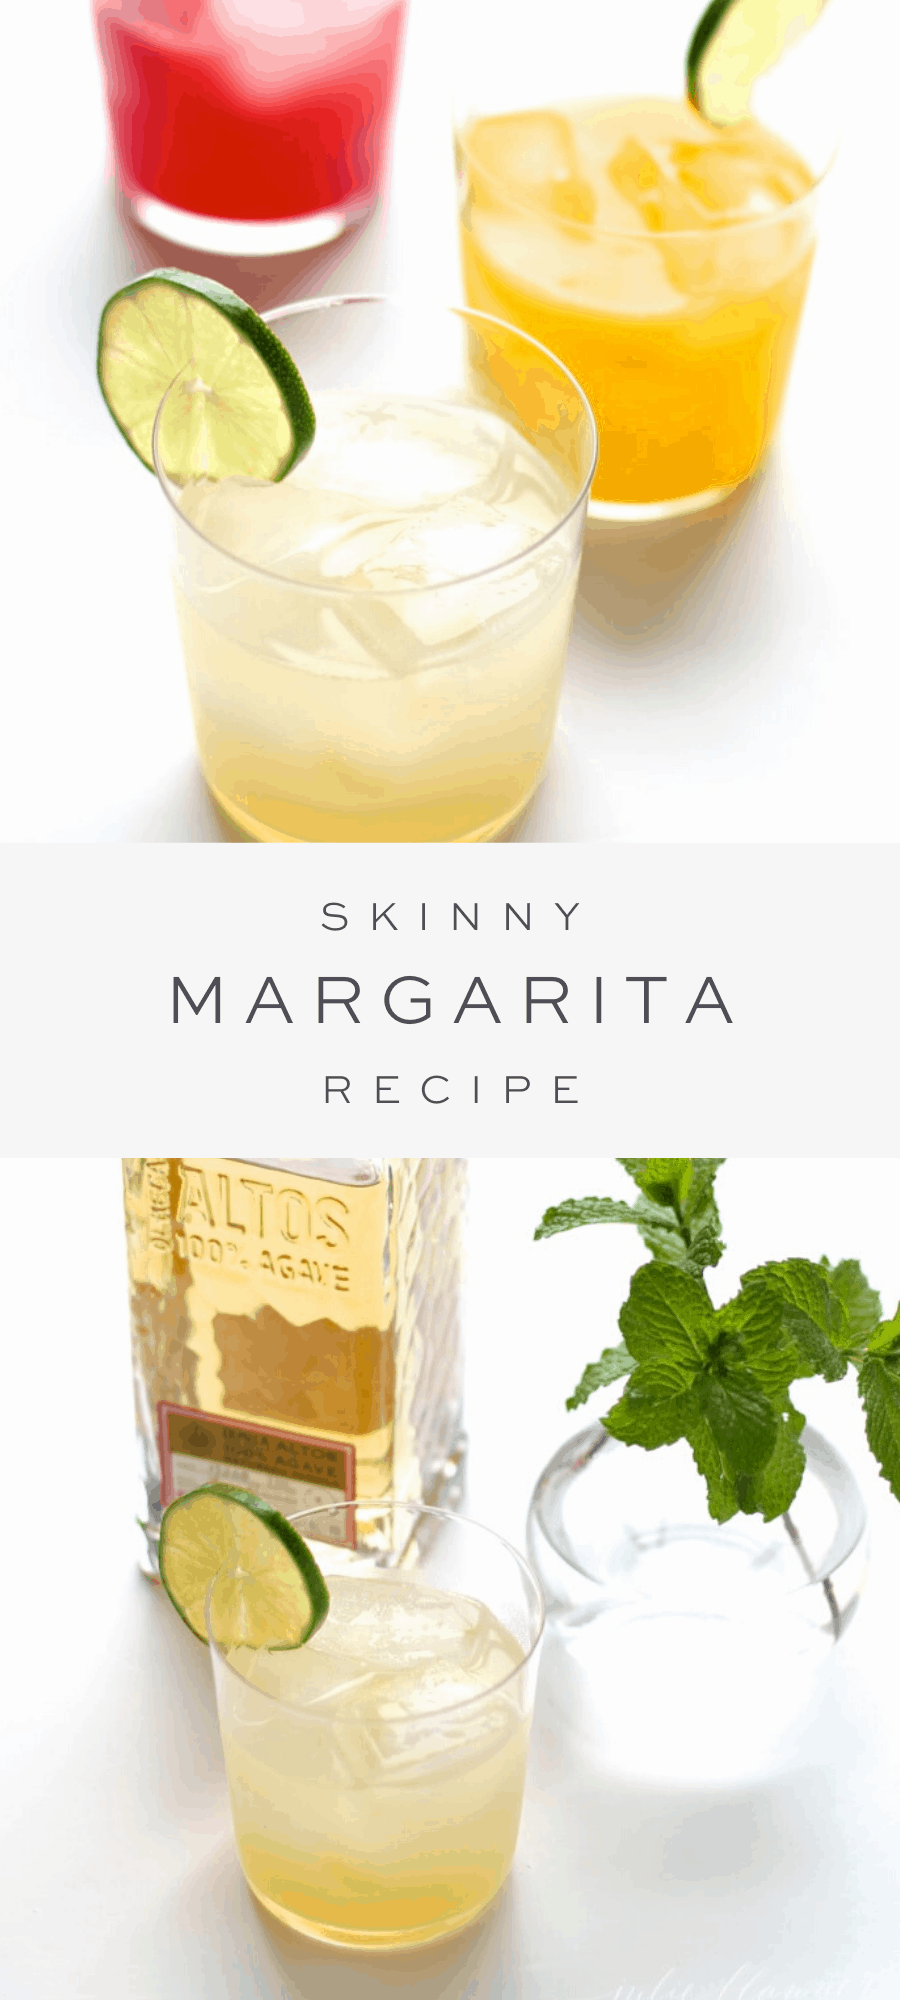 Skinny Margarita Recipe - a Low Calorie, Fresh Margarita without a Mix